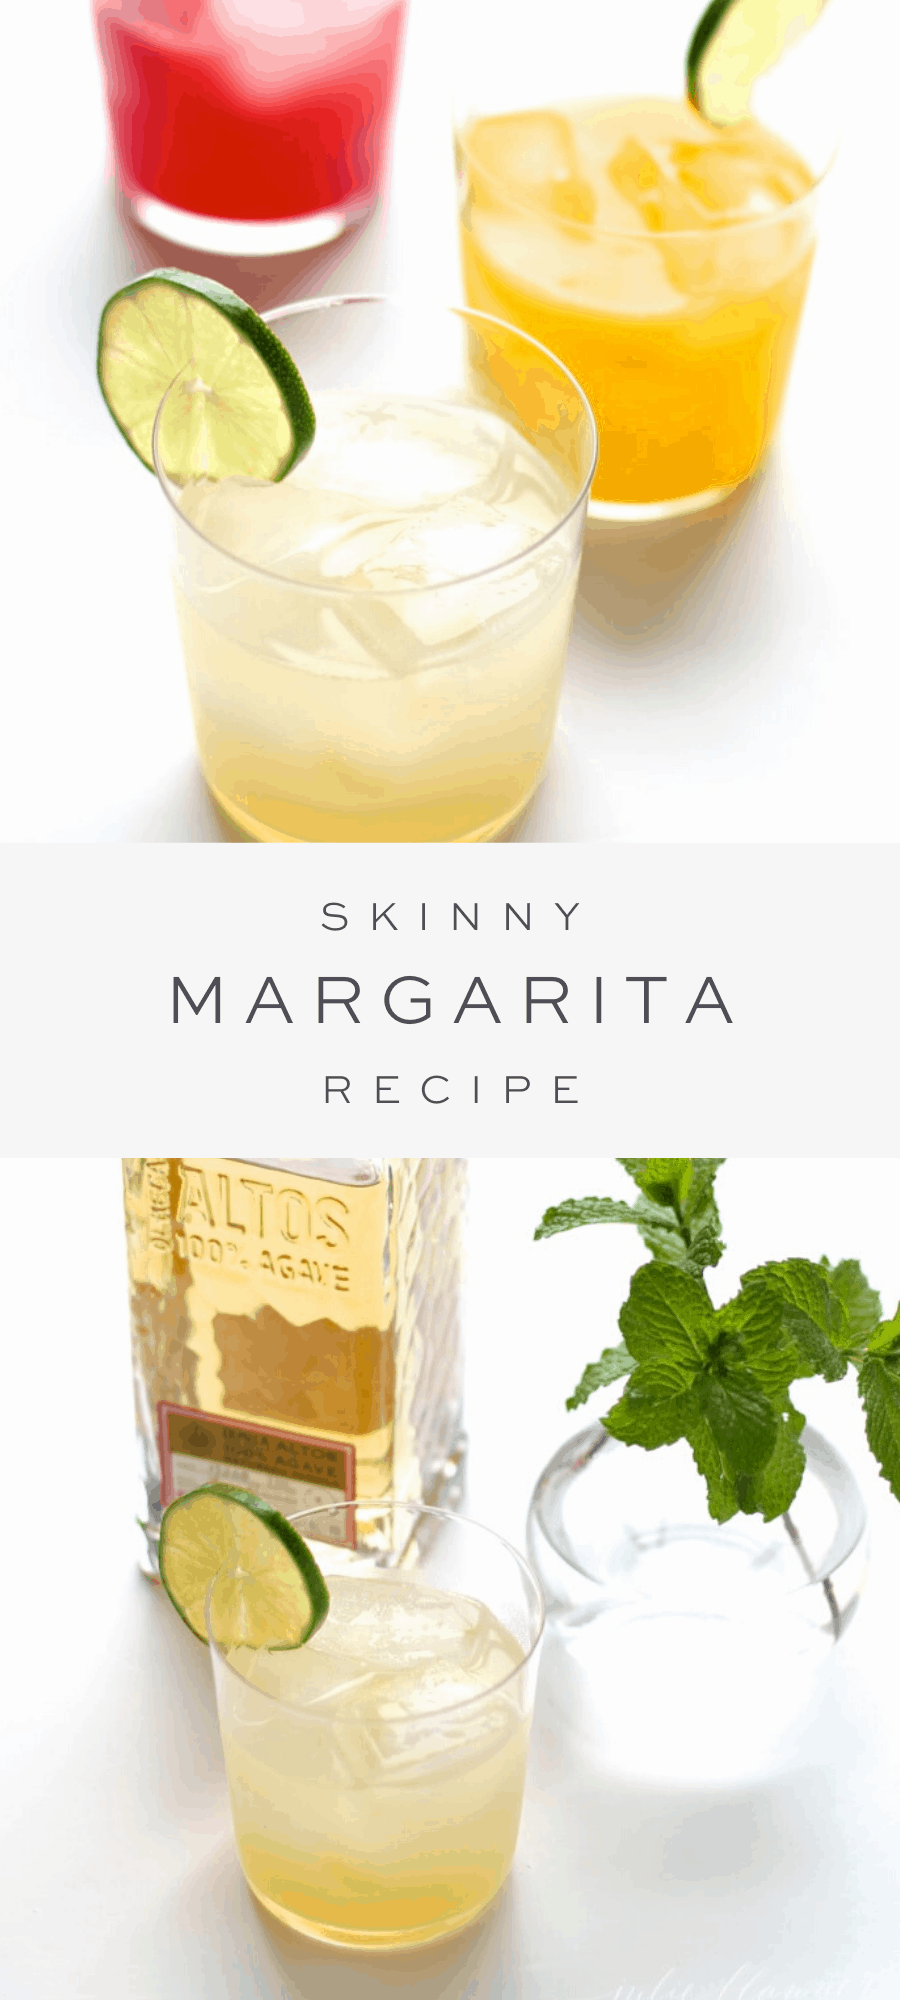 Skinny Margarita Recipe - a Low Calorie, Fresh Margarita without a Mix